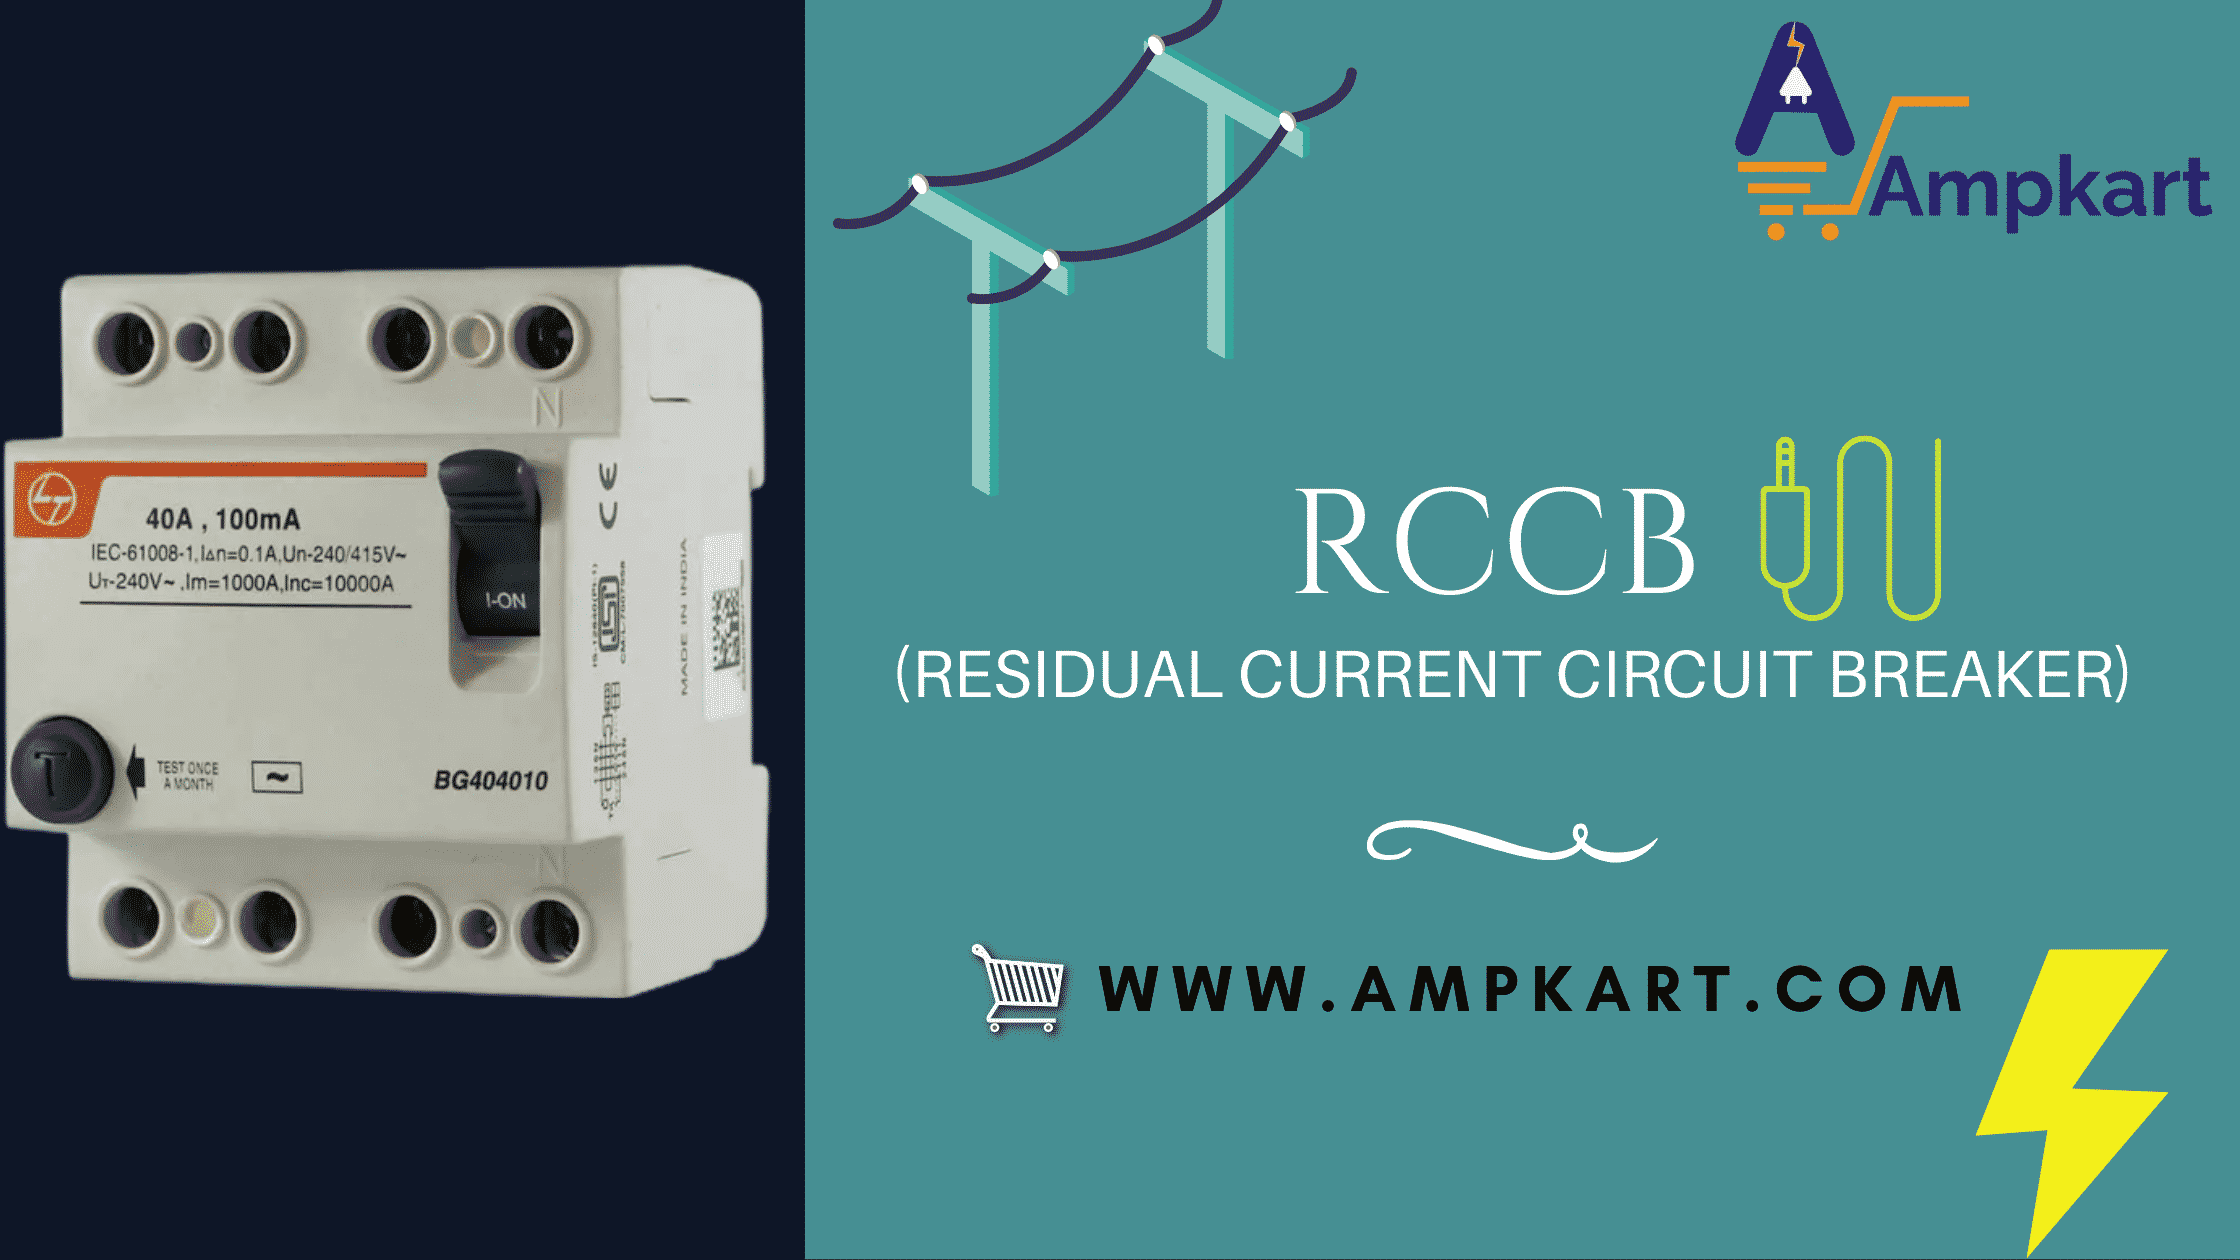 What Are The Various Advantages And Disadvantages Of RCCB?